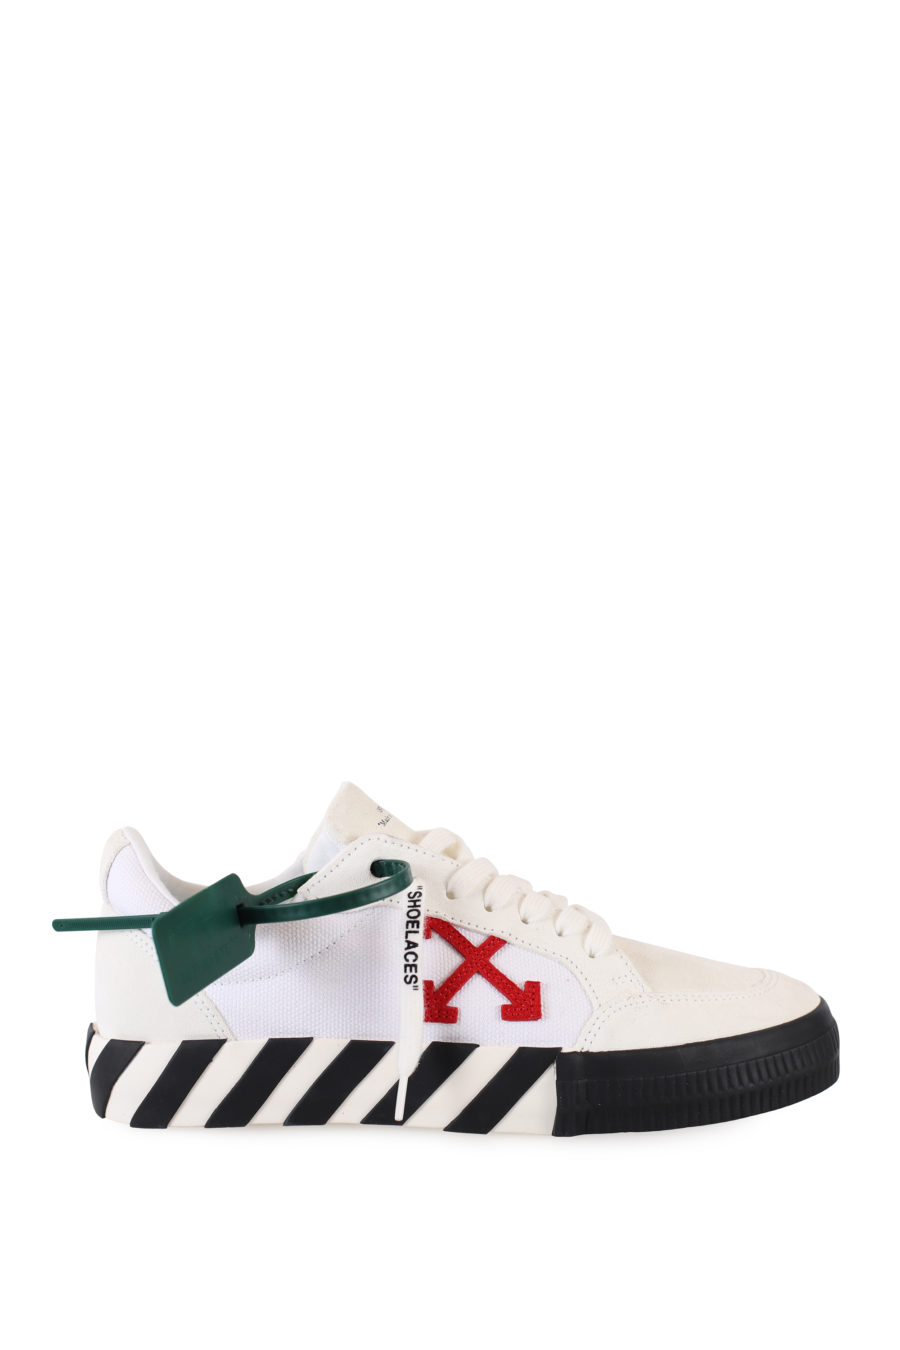 White "vulcanized" shoes with red arrows - IMG 2250